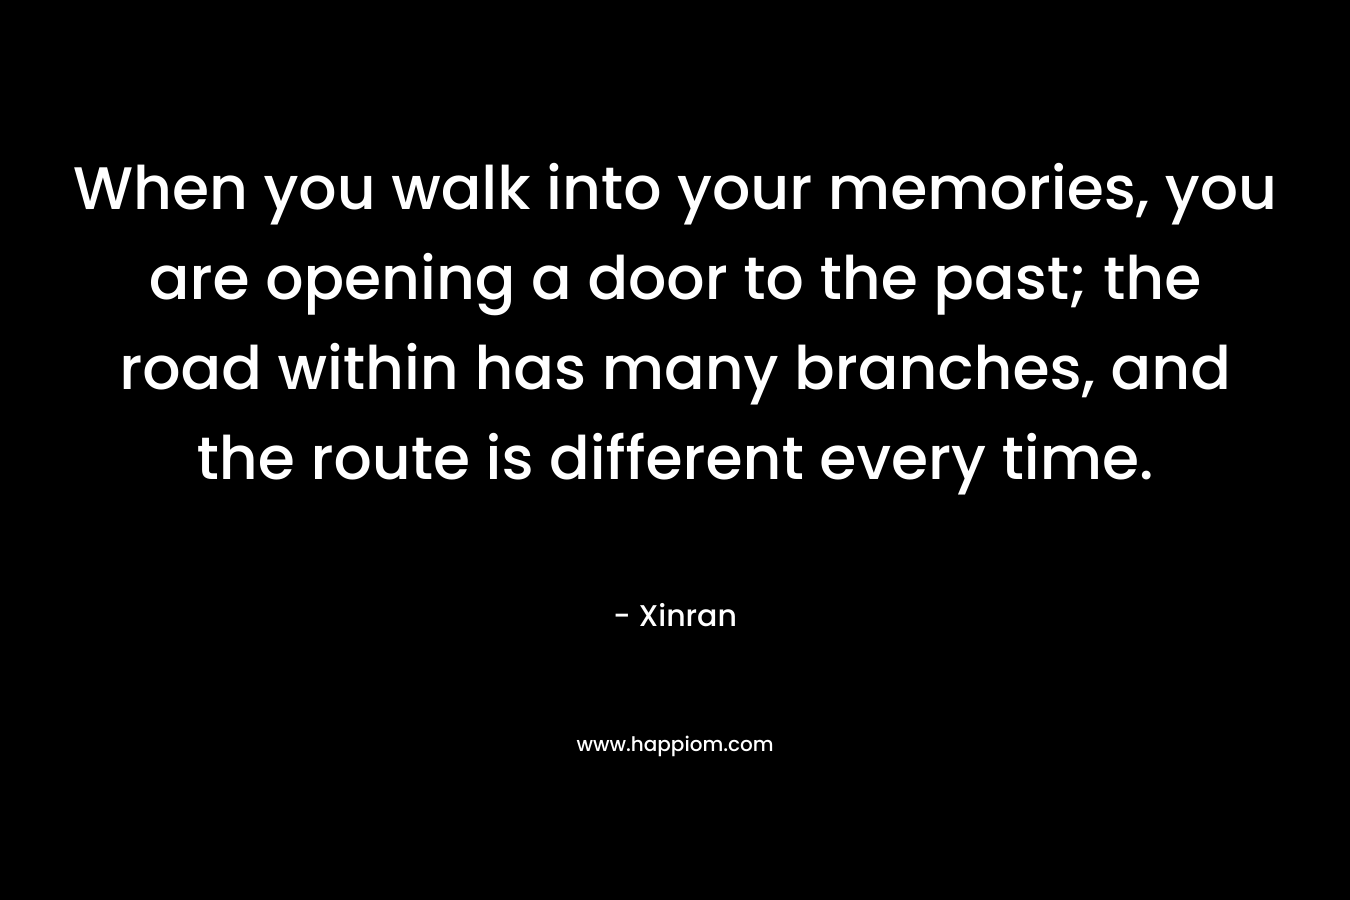 When you walk into your memories, you are opening a door to the past; the road within has many branches, and the route is different every time. – Xinran